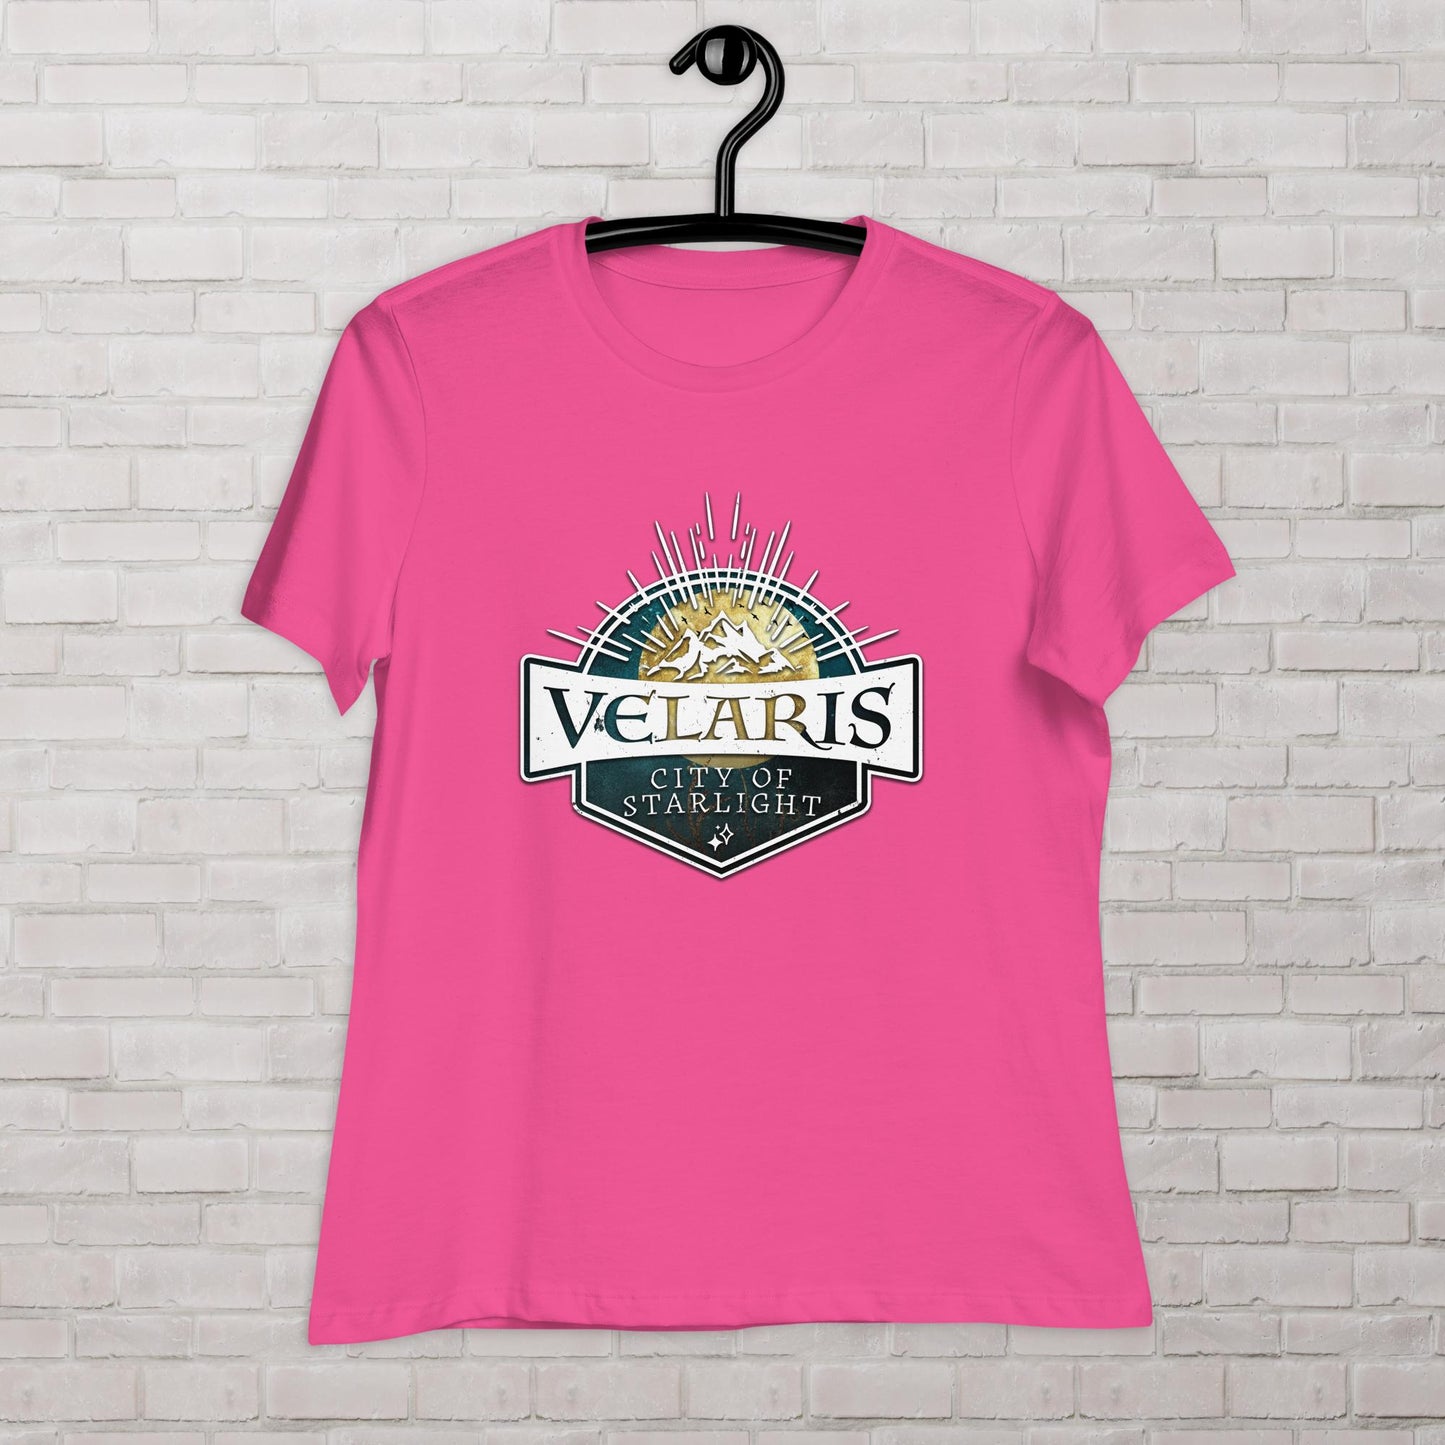 Velaris Night Court of Thorns and Roses Femme Fit Shirt Plus Size Available